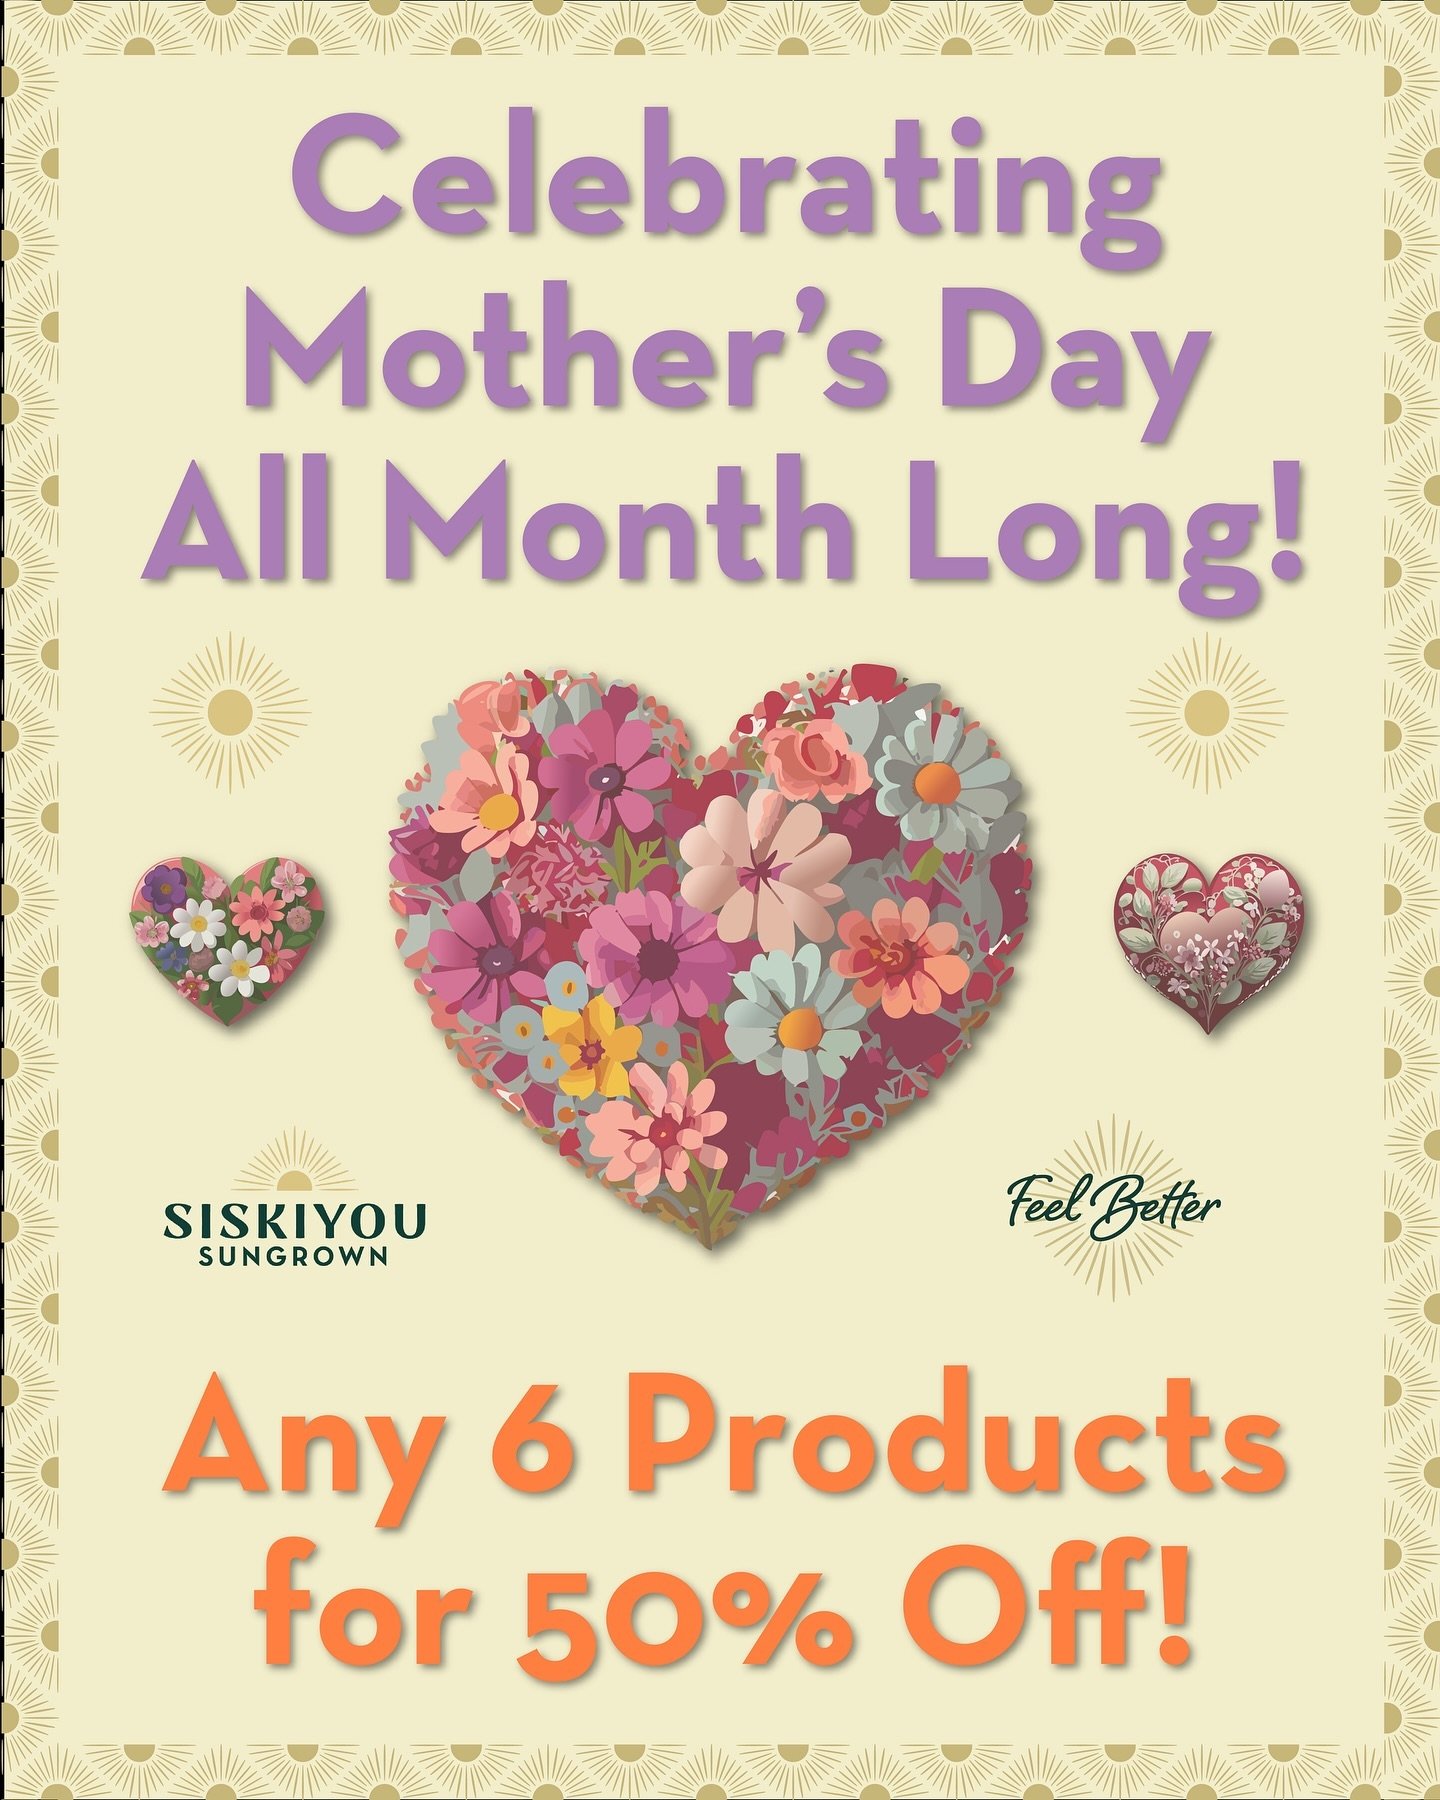 We are celebrating 💚Mother&rsquo;s Day❤️ all month long with 50% off any six products at siskiyousungrownhemp.com‼️

Truly full spectrum hemp CBD products crafted to help you feel better!

#MothersDay #Sale #HalfOff #HealthAndWellness #Hemp #CBD #Si